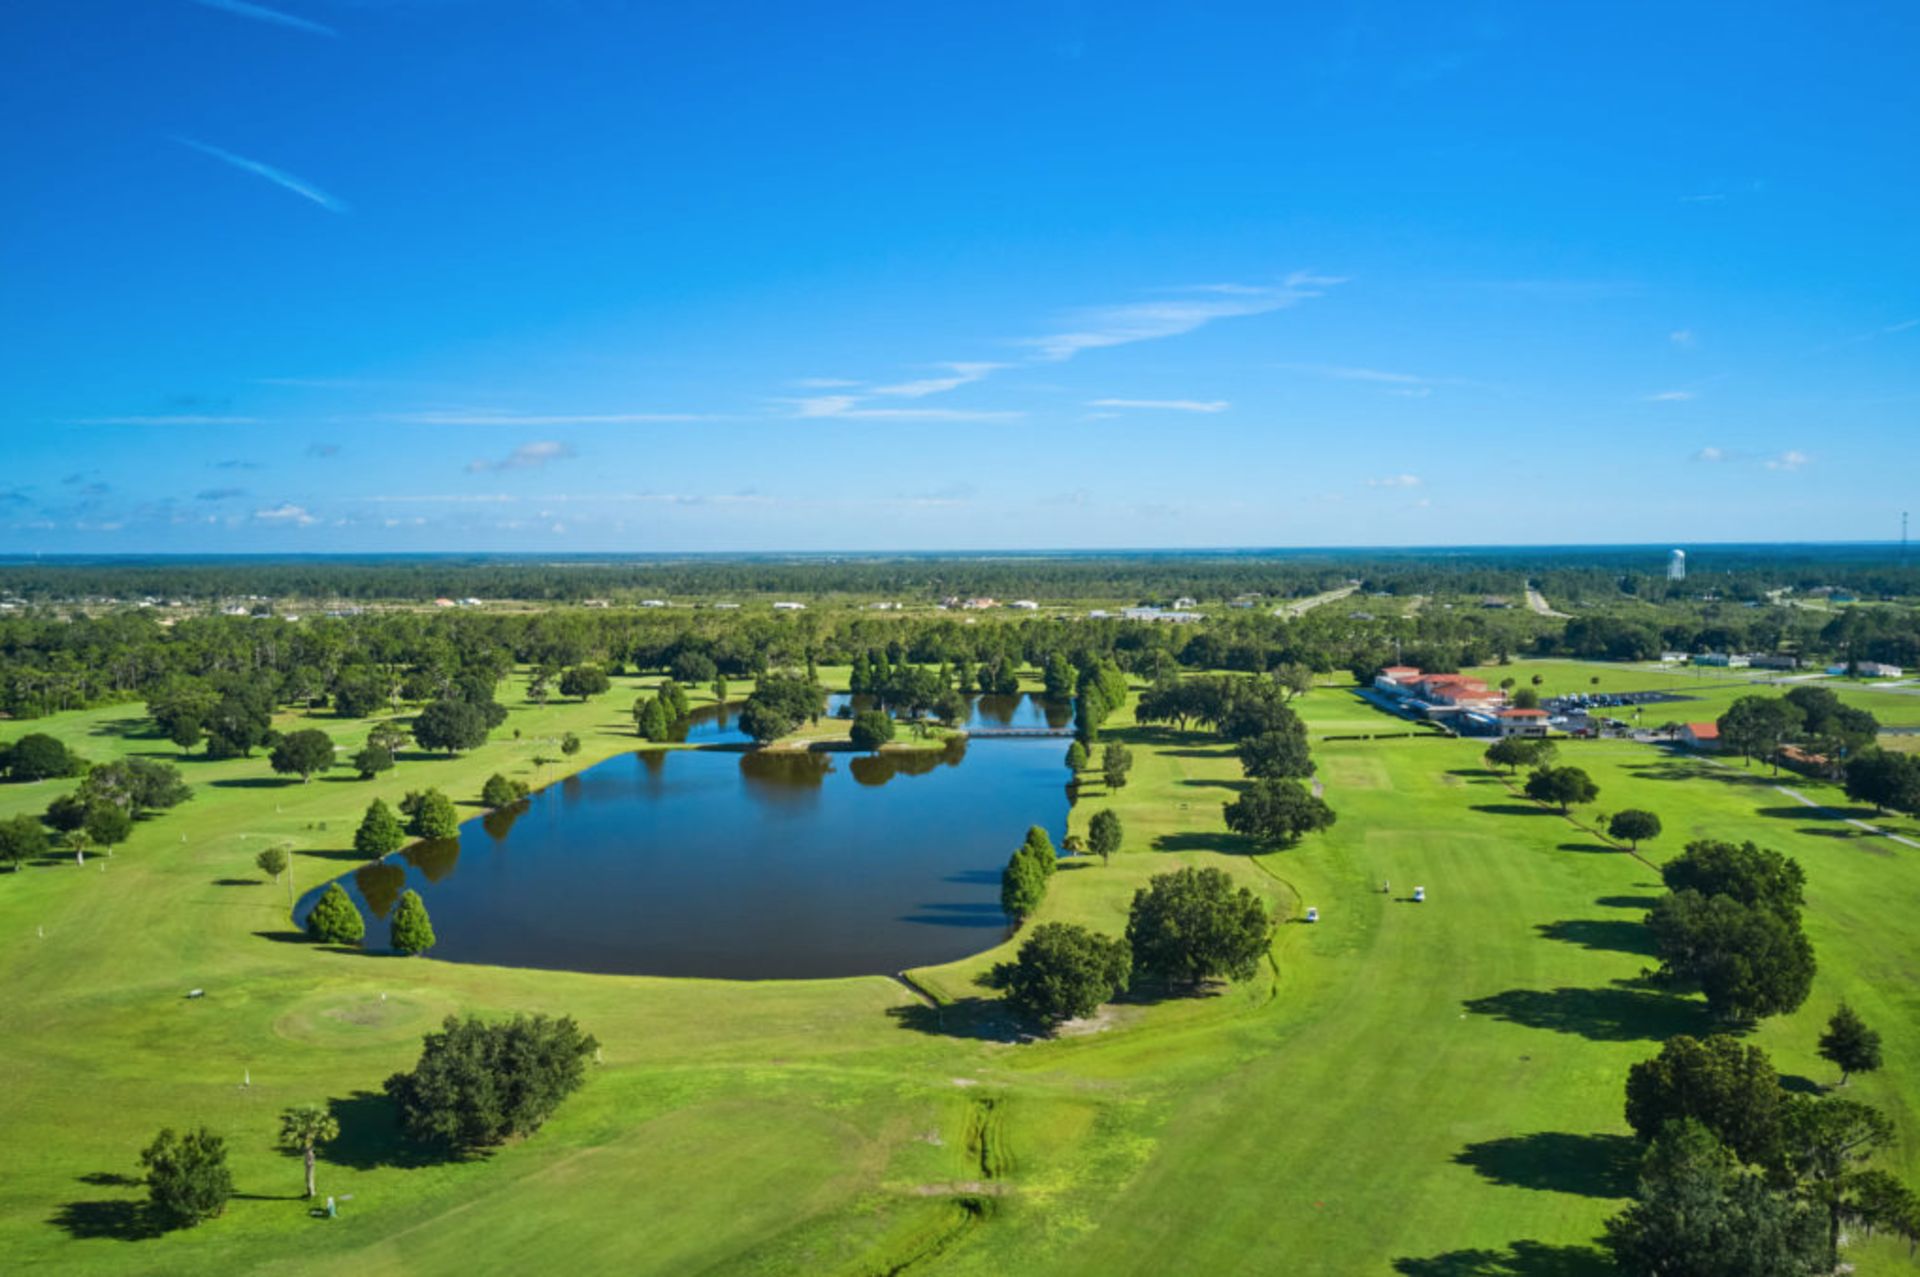 Build Your Central Florida Getaway on this Half-Acre Lot! - Image 5 of 11